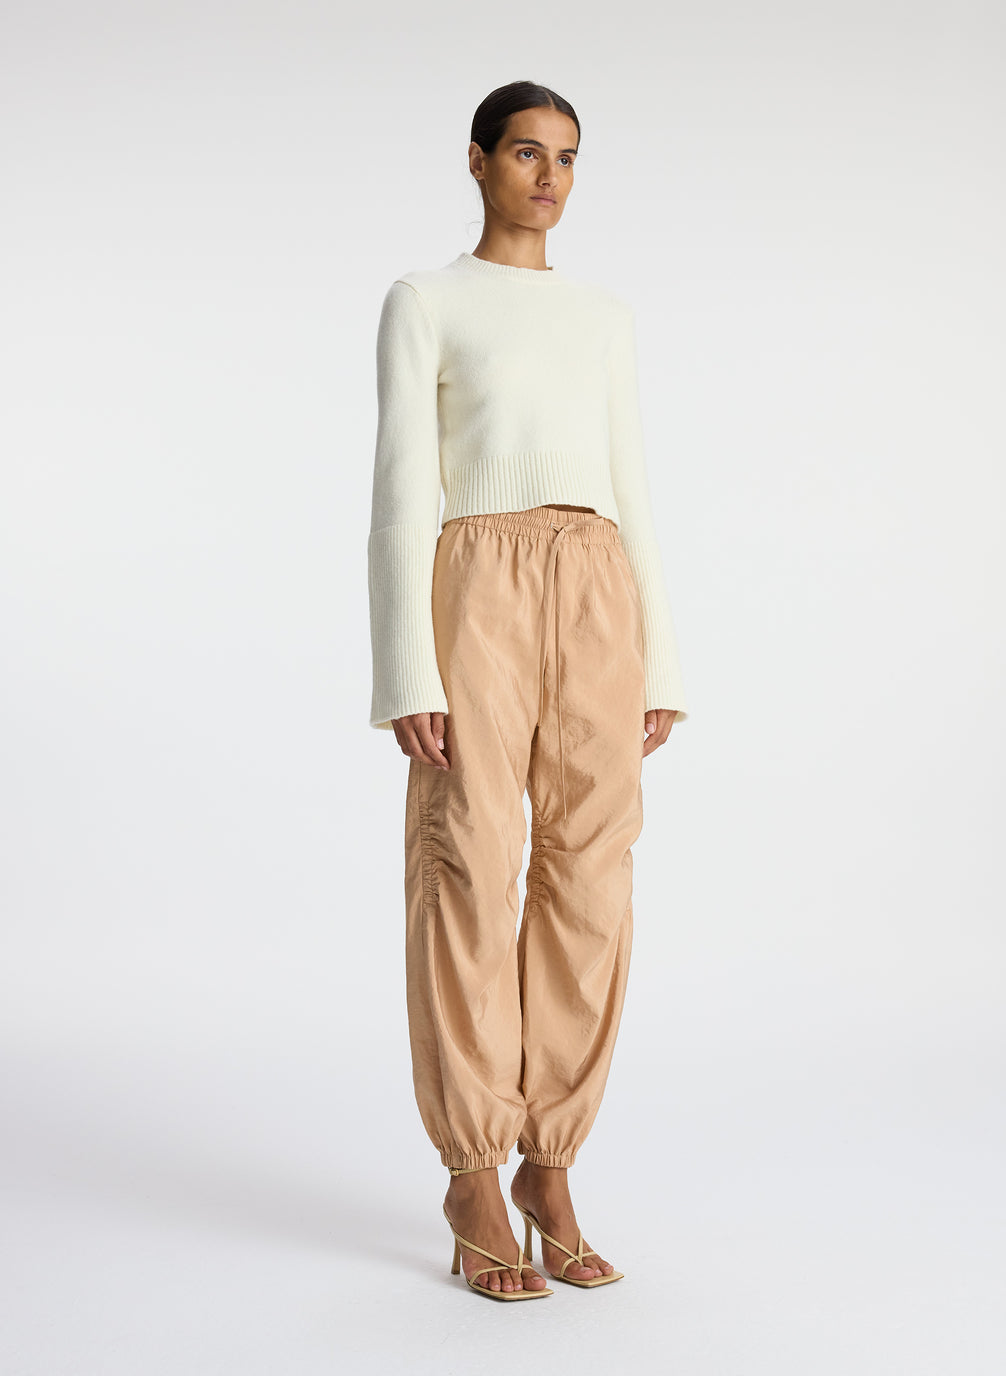 side view of woman wearing white sweater and beige nylon drawstring pants